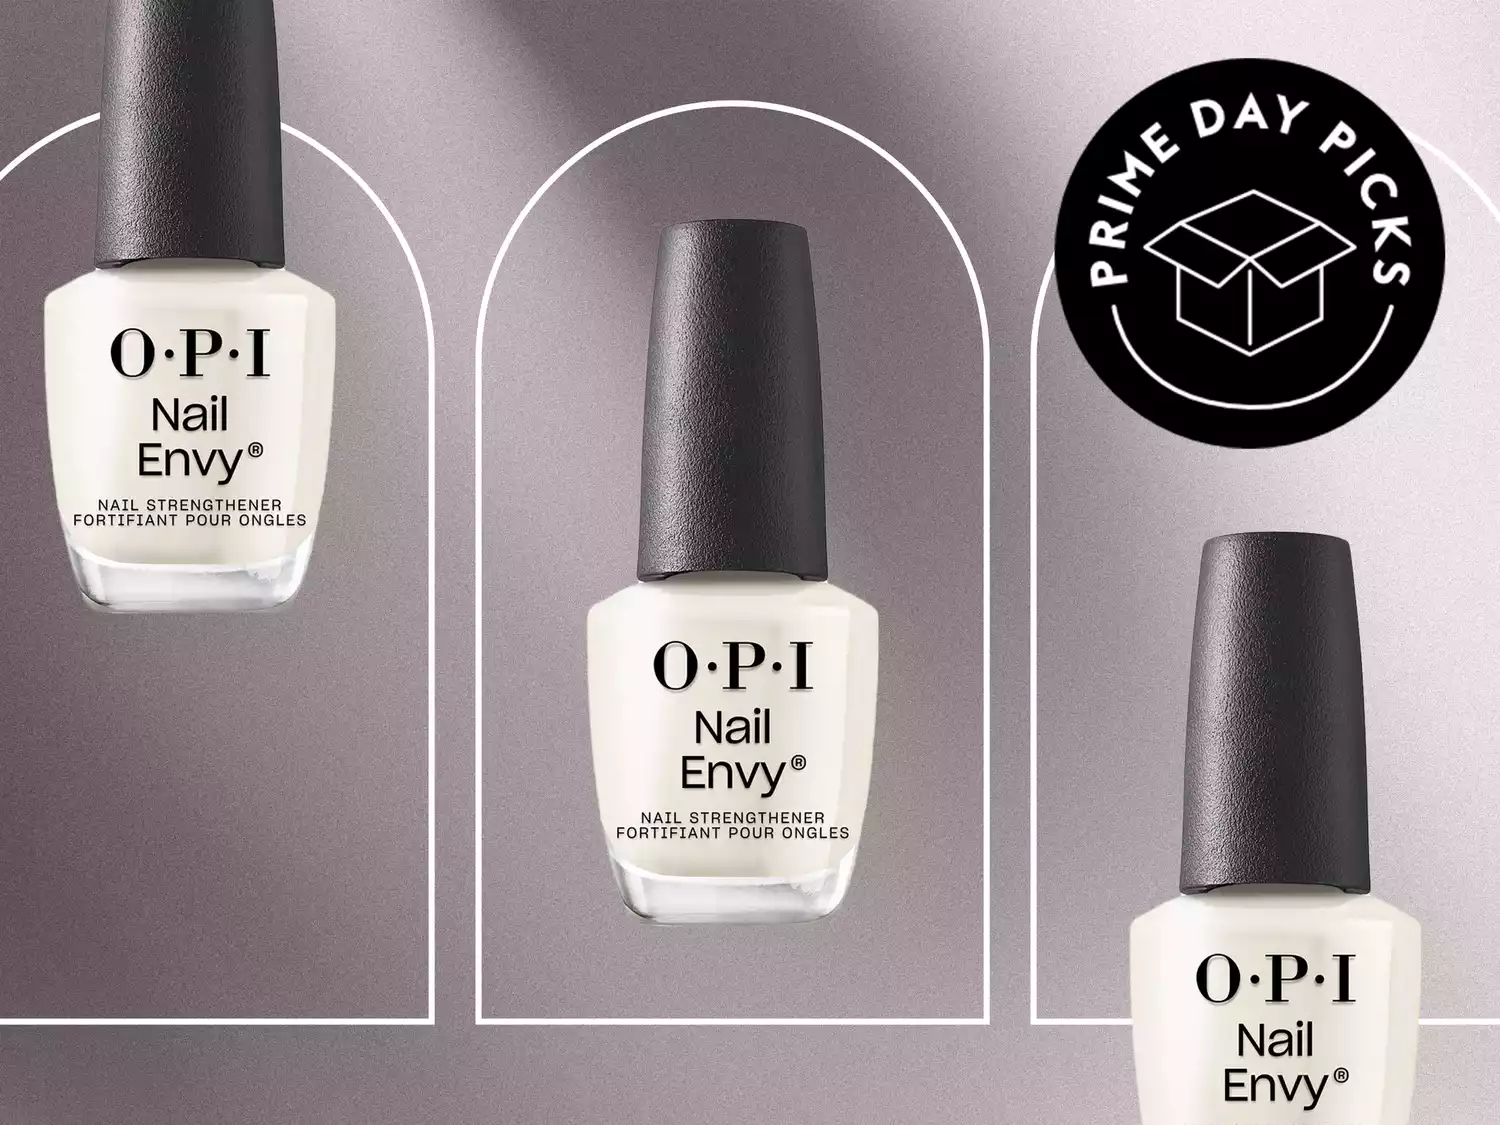 Shoppers Saw a “Huge Improvement” in Brittle Nails With This Now-$14 Strengthening Treatment